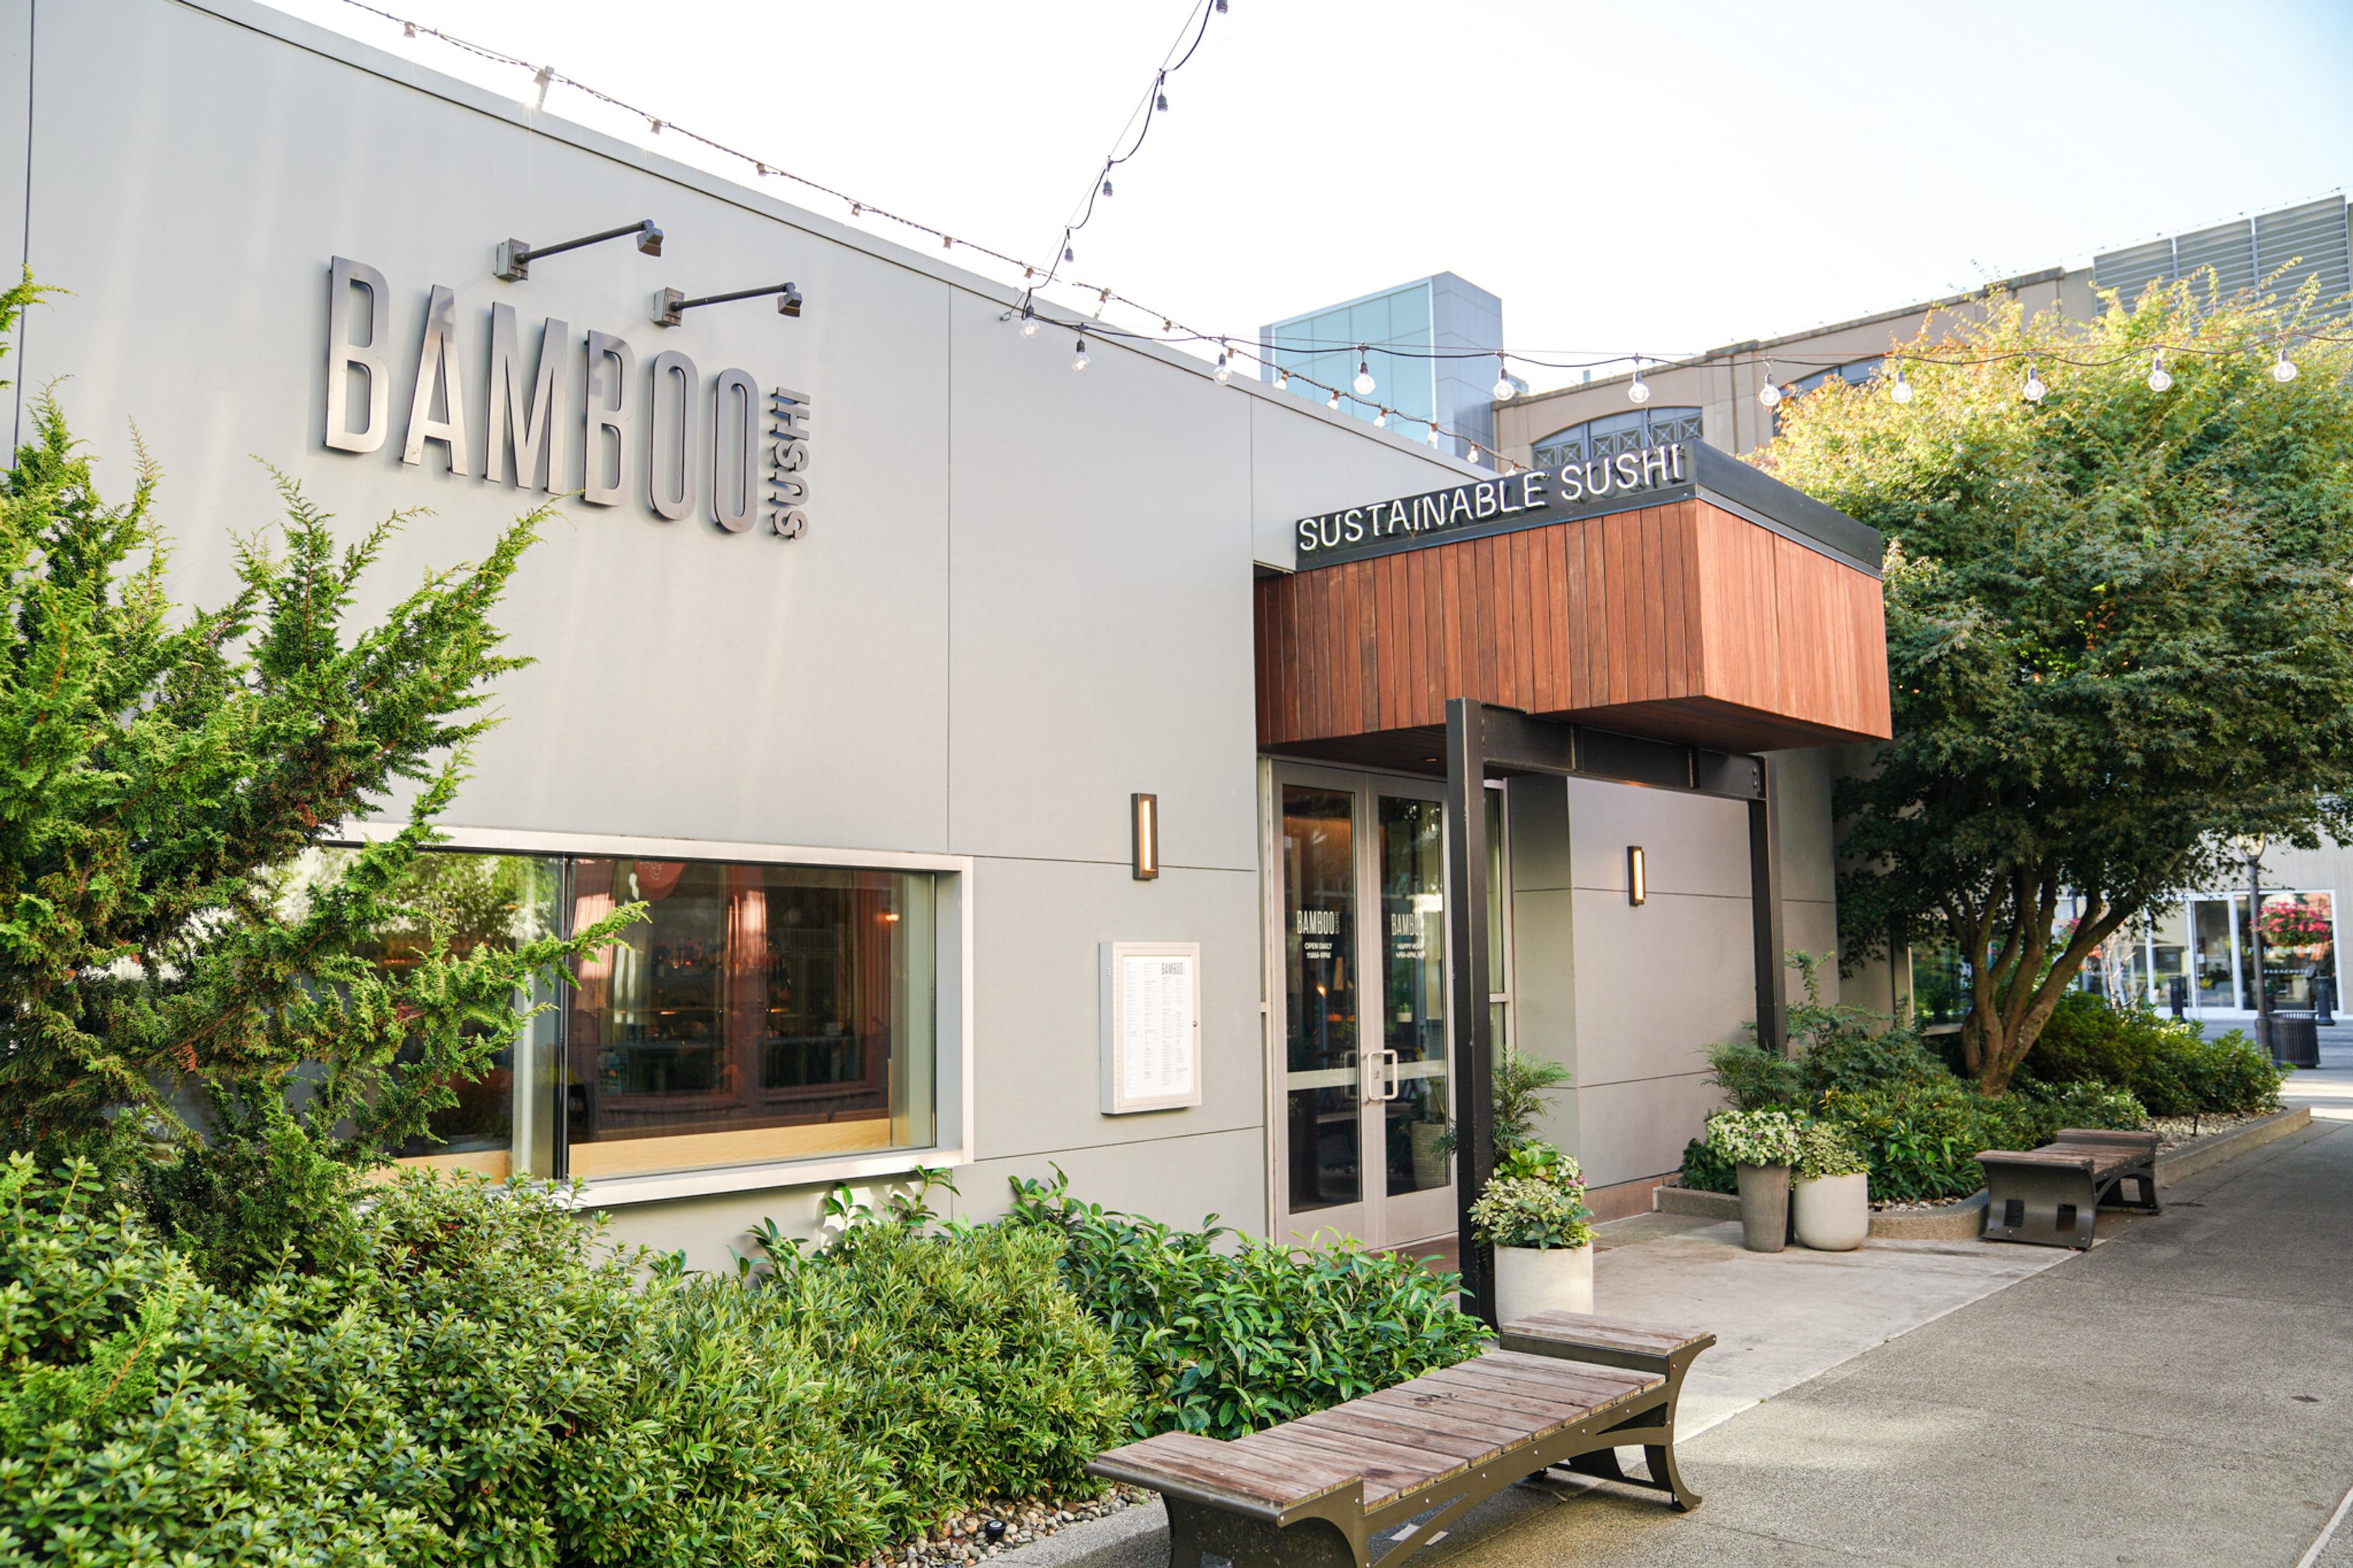 Bamboo Sushi Opens Its First Seattle Restaurant Today in the